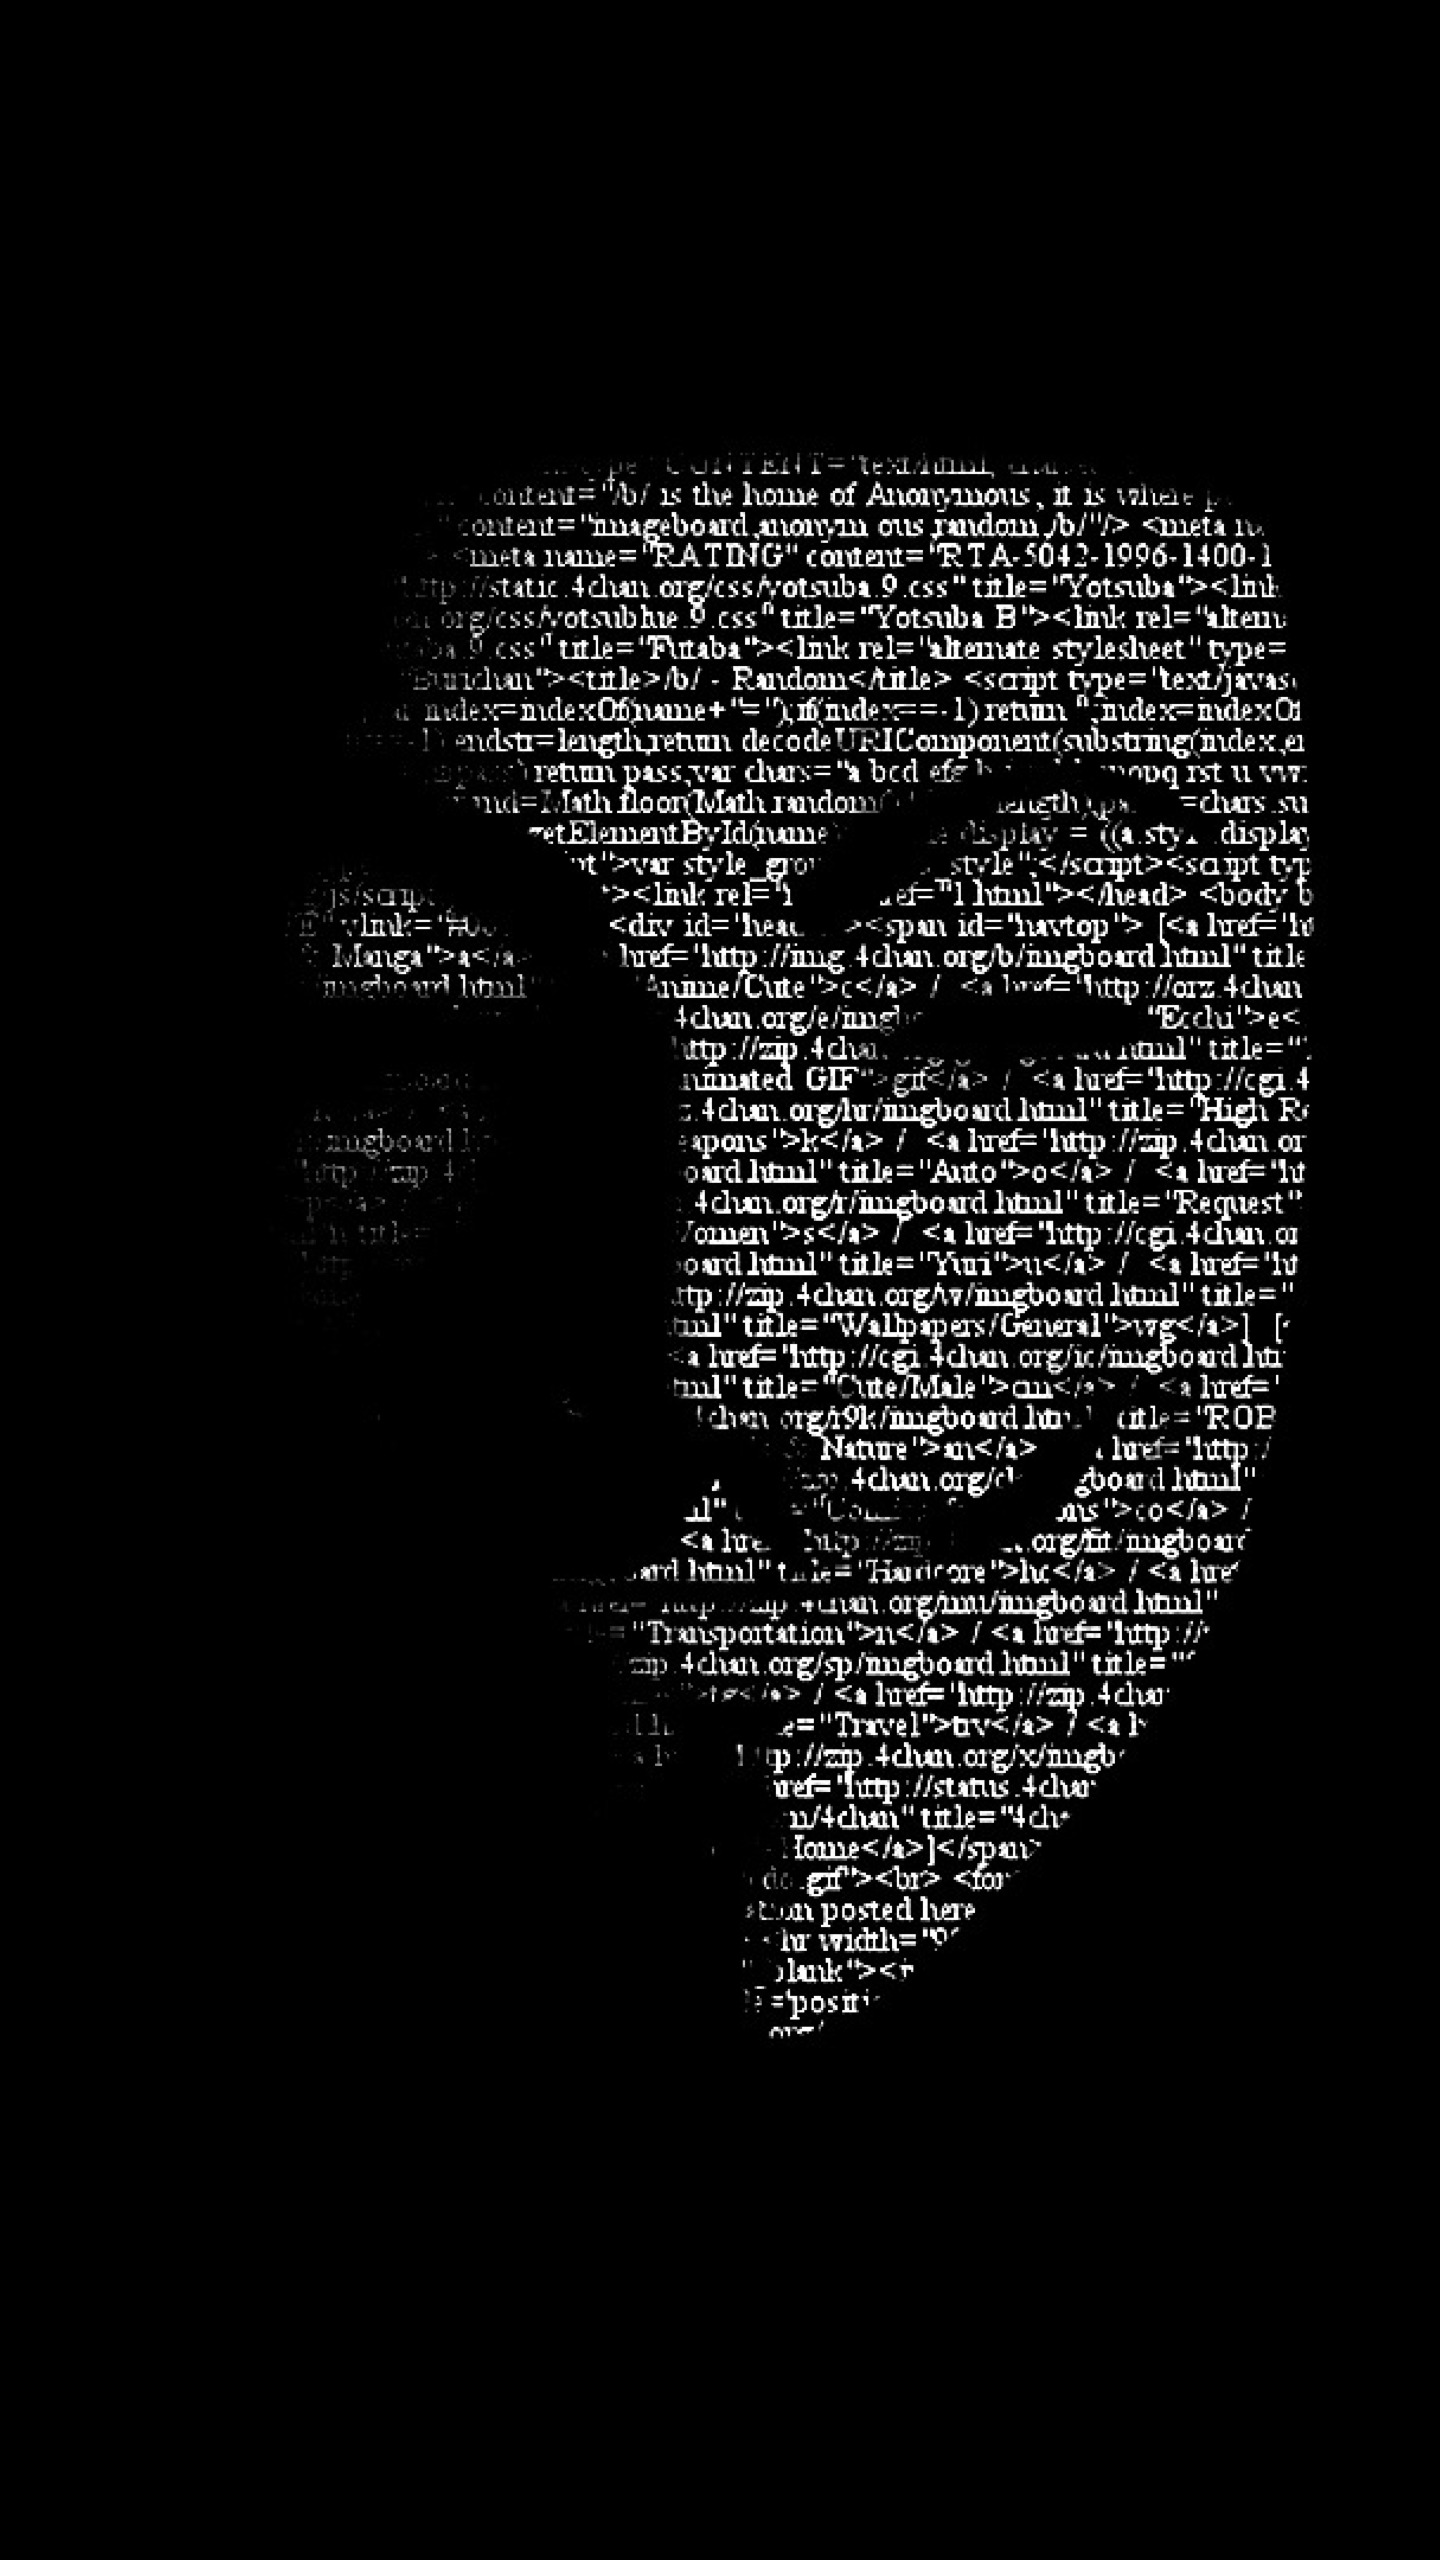 anonymous wallpaper,black,face,head,black and white,darkness